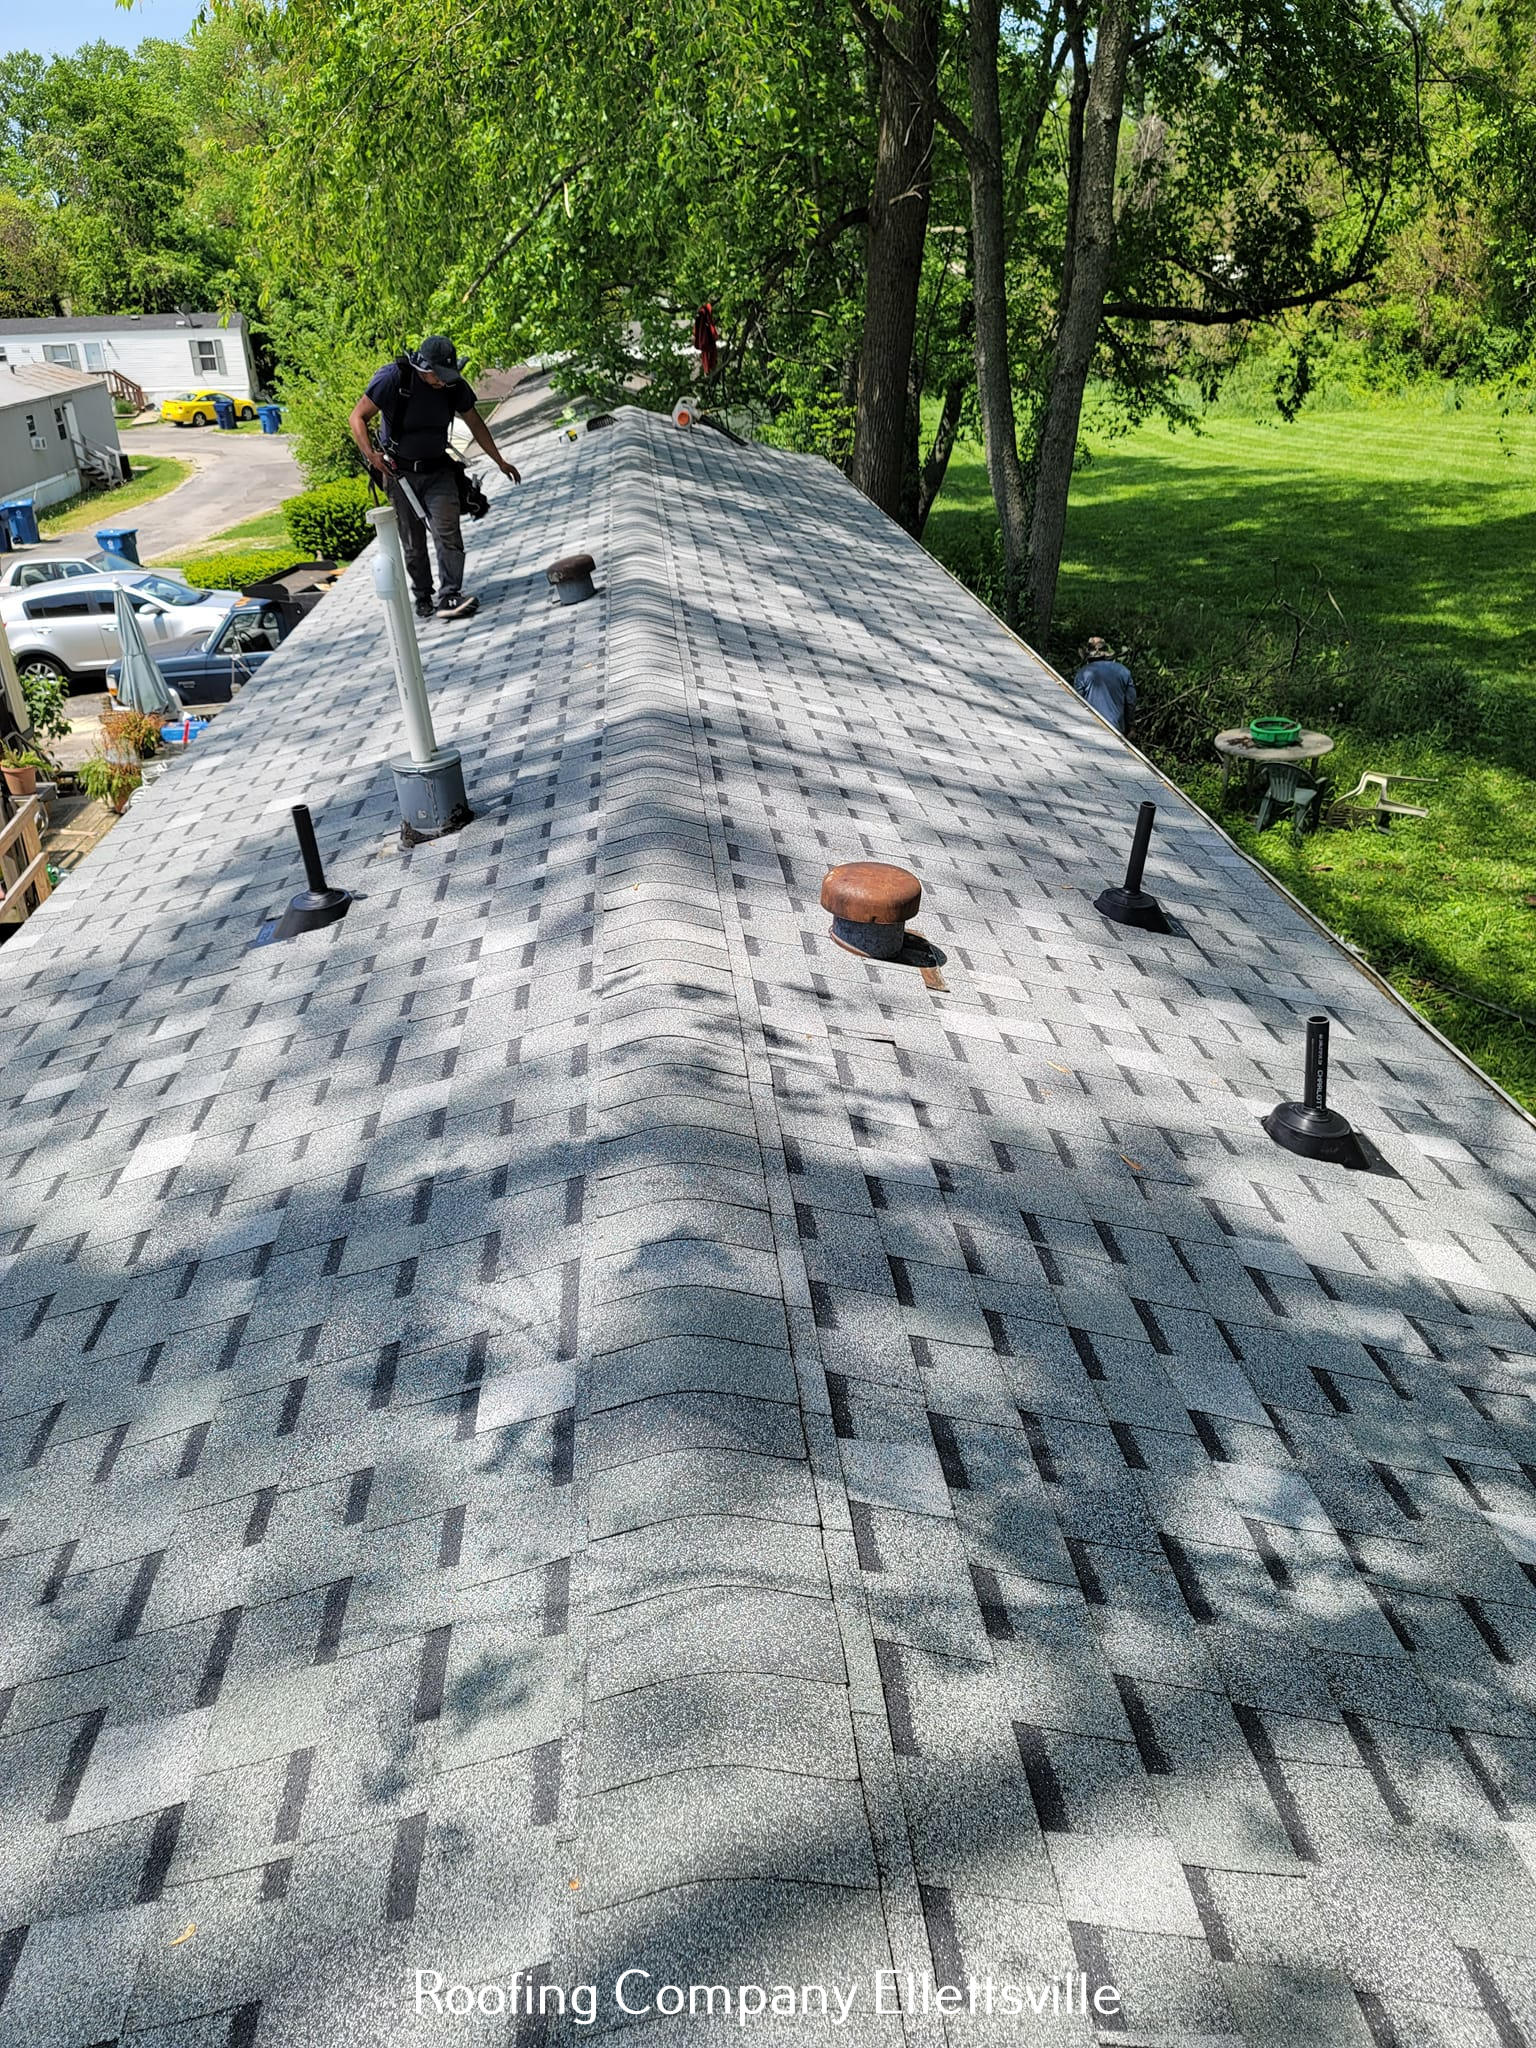 Midwest Storm Exteriors Offers Expert Roofing Services in Ellettsville, IN